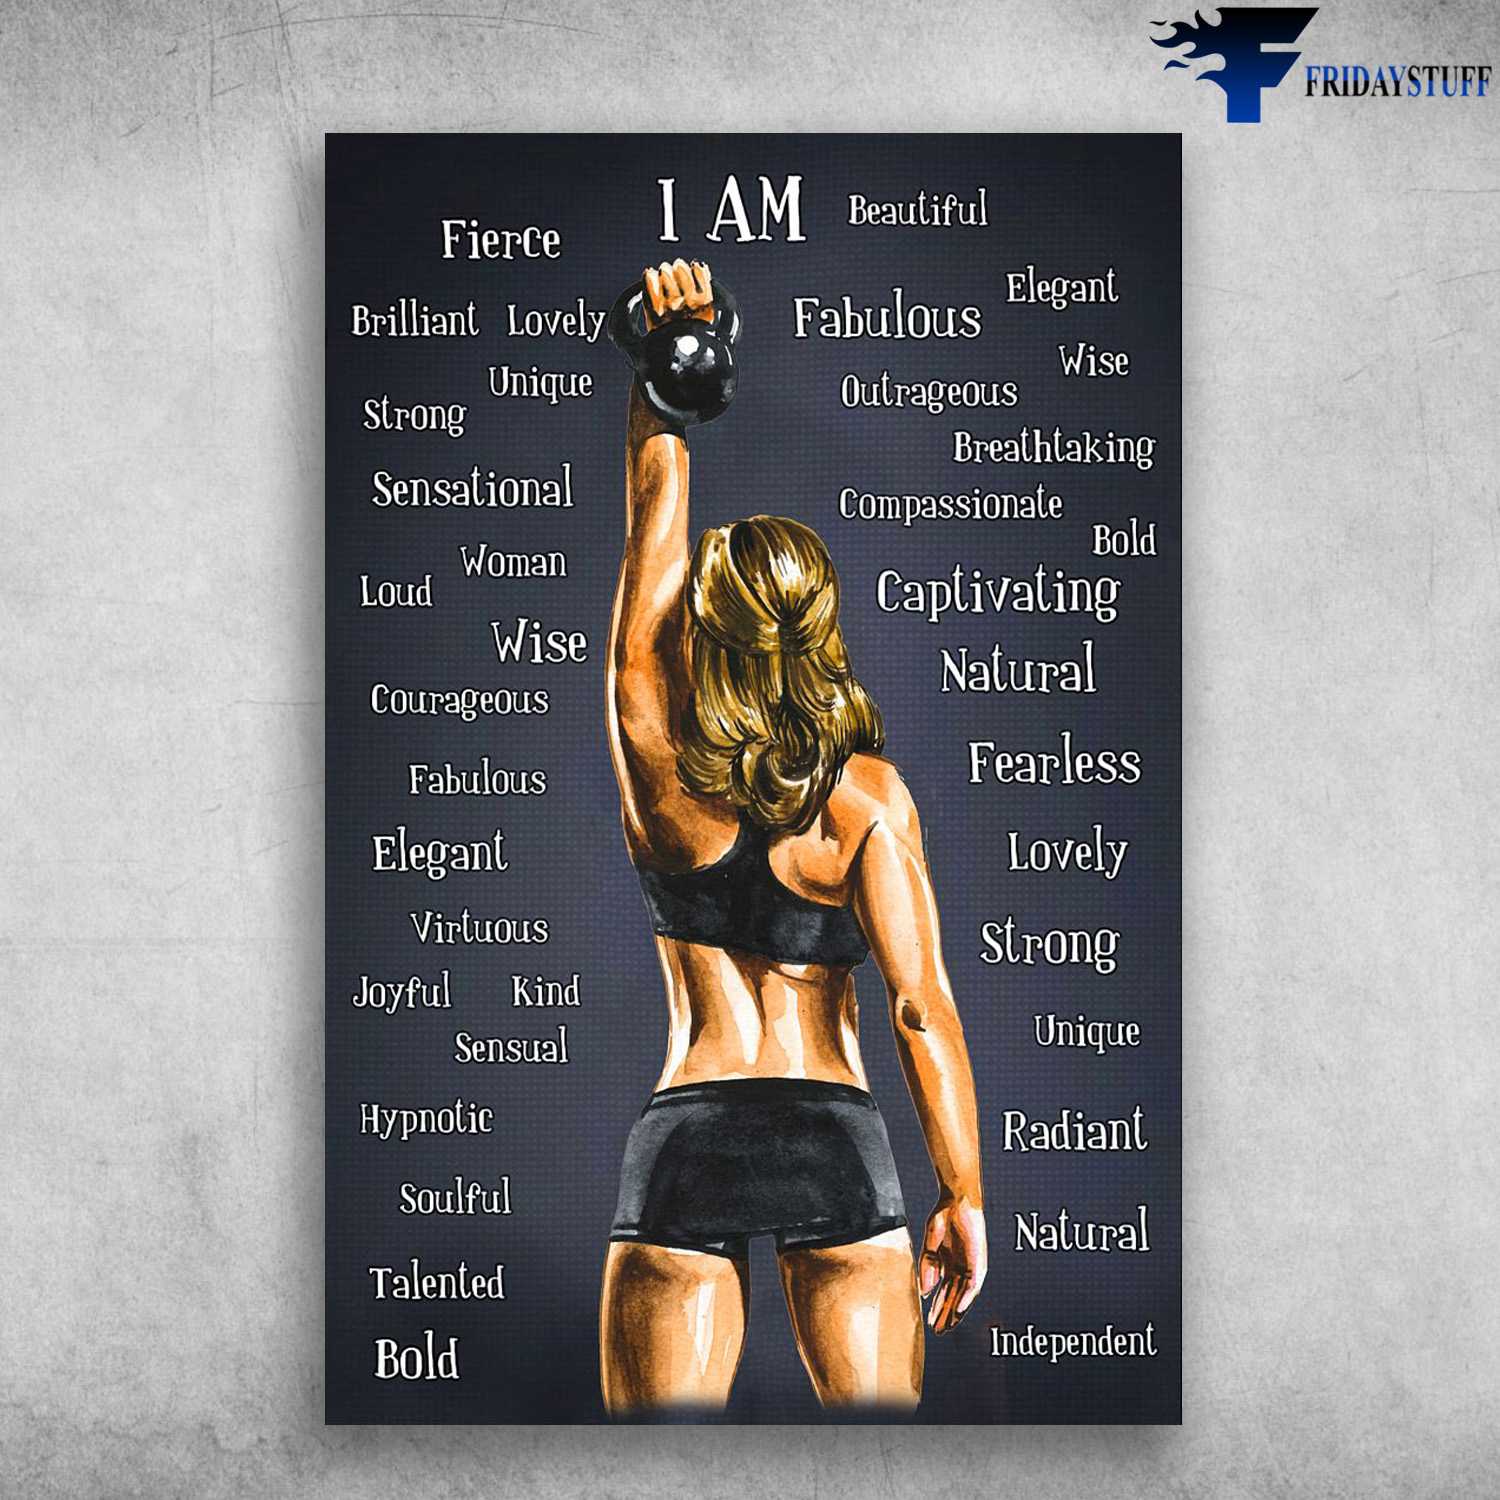 Gym Girl, Weightlifting Girl, I Am Beautiful, Fierce, Brilliant, Lovely, Strong, Sensational, Woman, Loud, WiseGym Girl, Weightlifting Girl, I Am Beautiful, Fierce, Brilliant, Lovely, Strong, Sensational, Woman, Loud, Wise